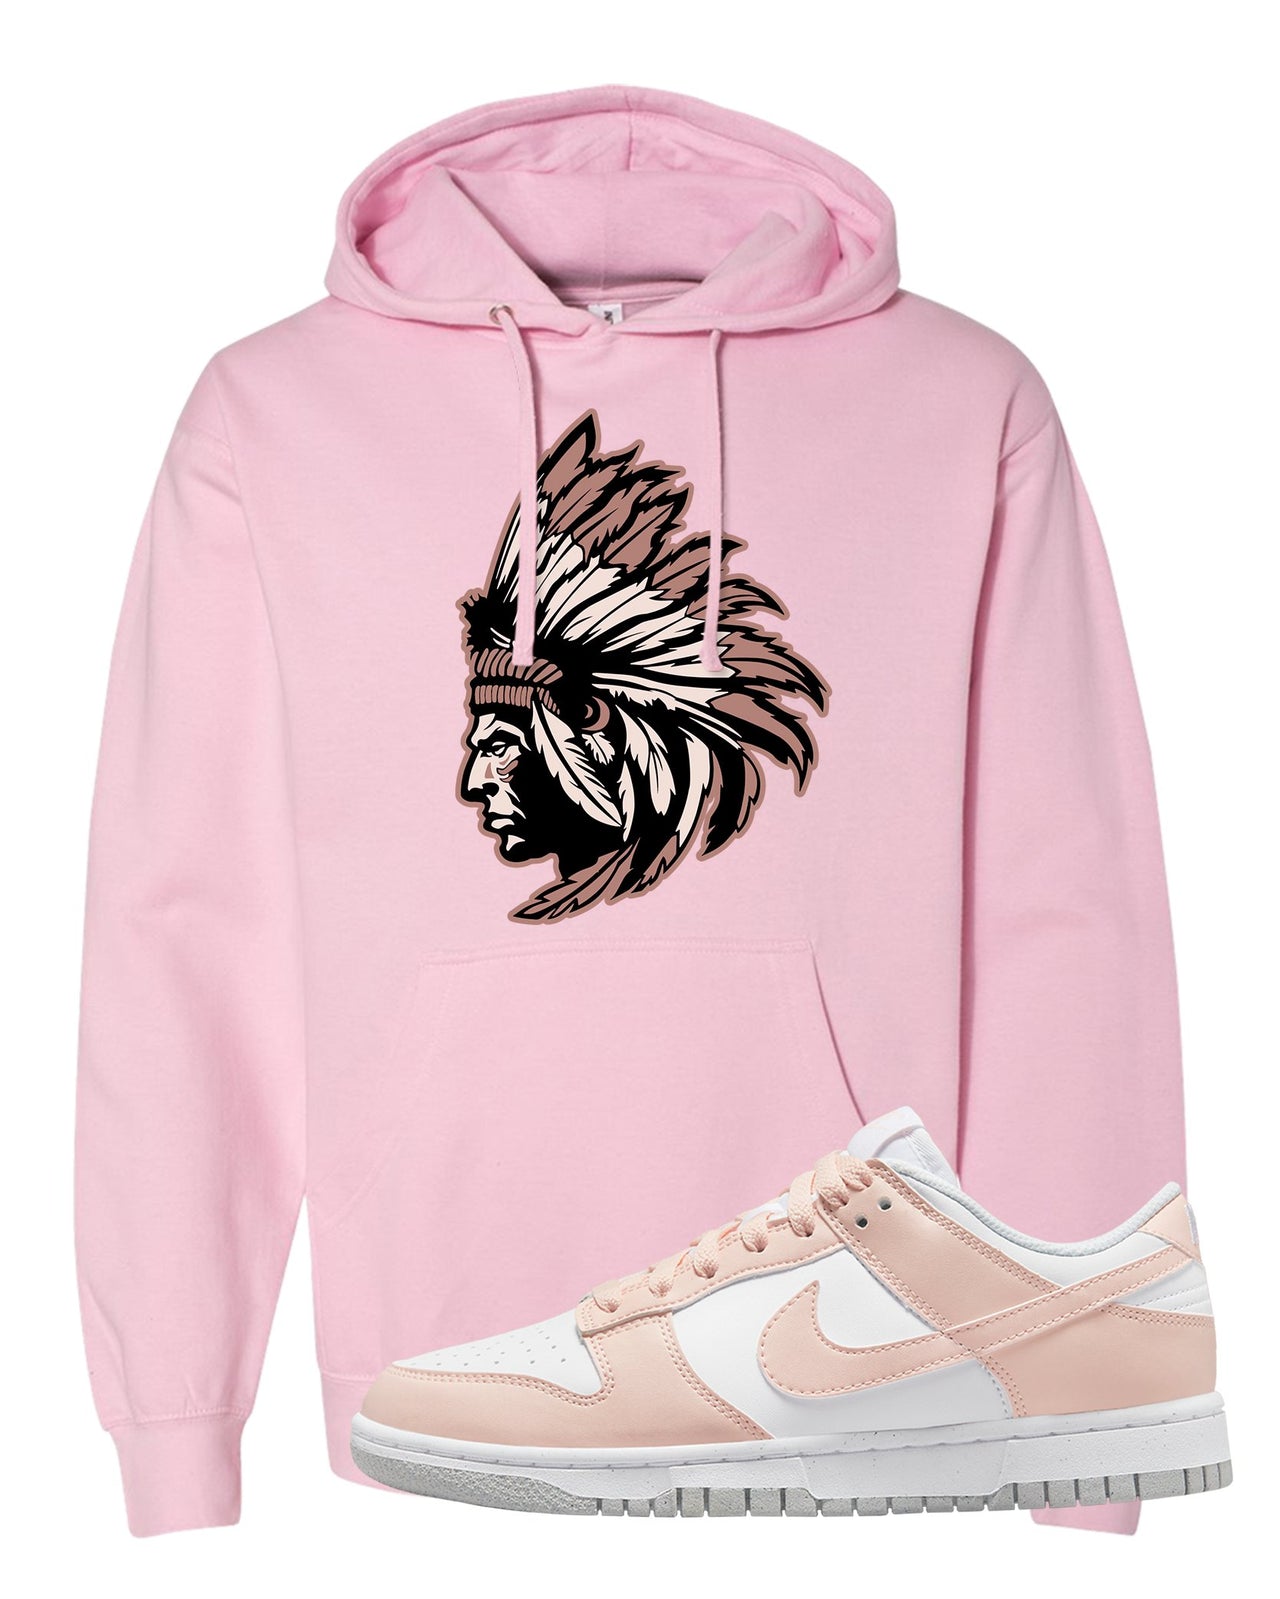 Next Nature Pale Citrus Low Dunks Hoodie | Indian Chief, Light Pink